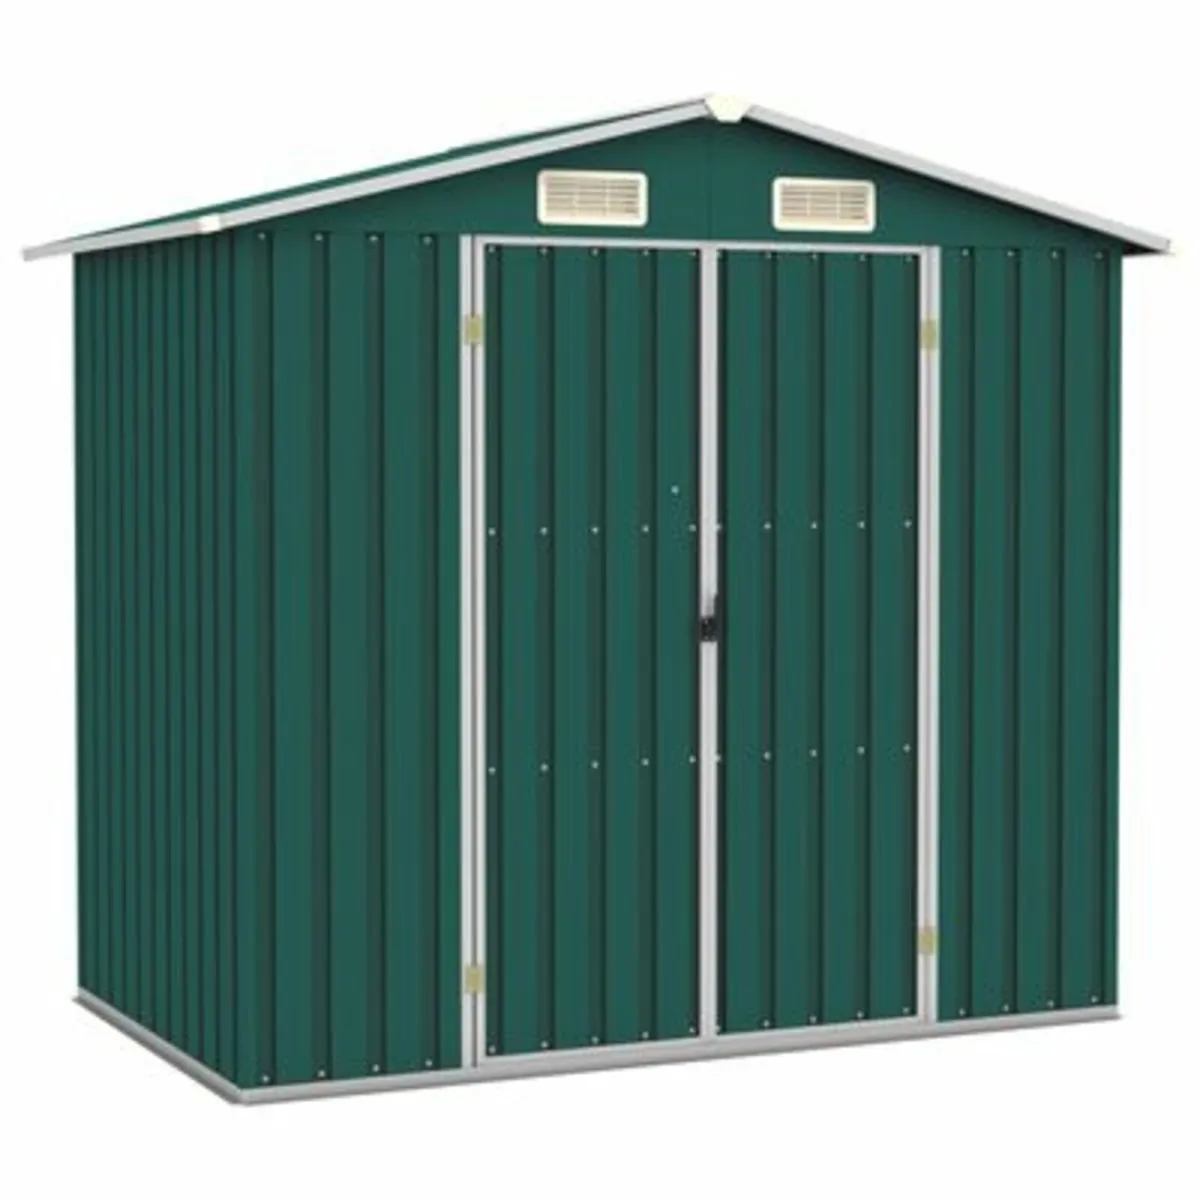 Shed Green 205x129x183 cm Galvanised Steel - Image 1